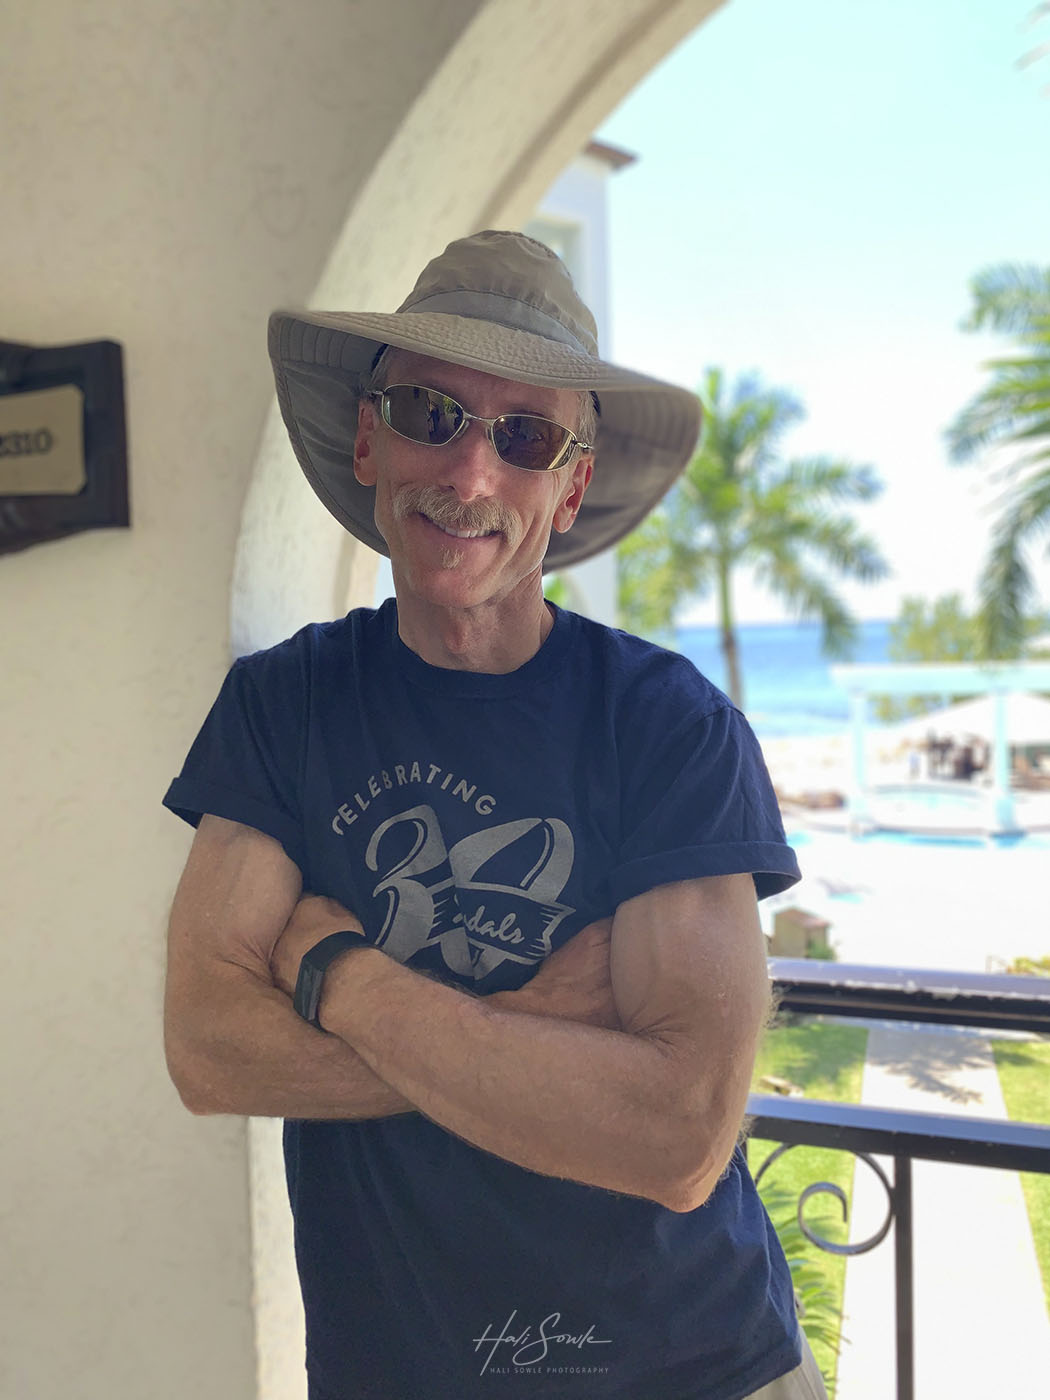 2019_09_Sandals-SouthCoast-10029_Edit1000.jpg - Iphone shot of Mike after we changed for lunch.  This seemed to be "the" portrait spot for us.